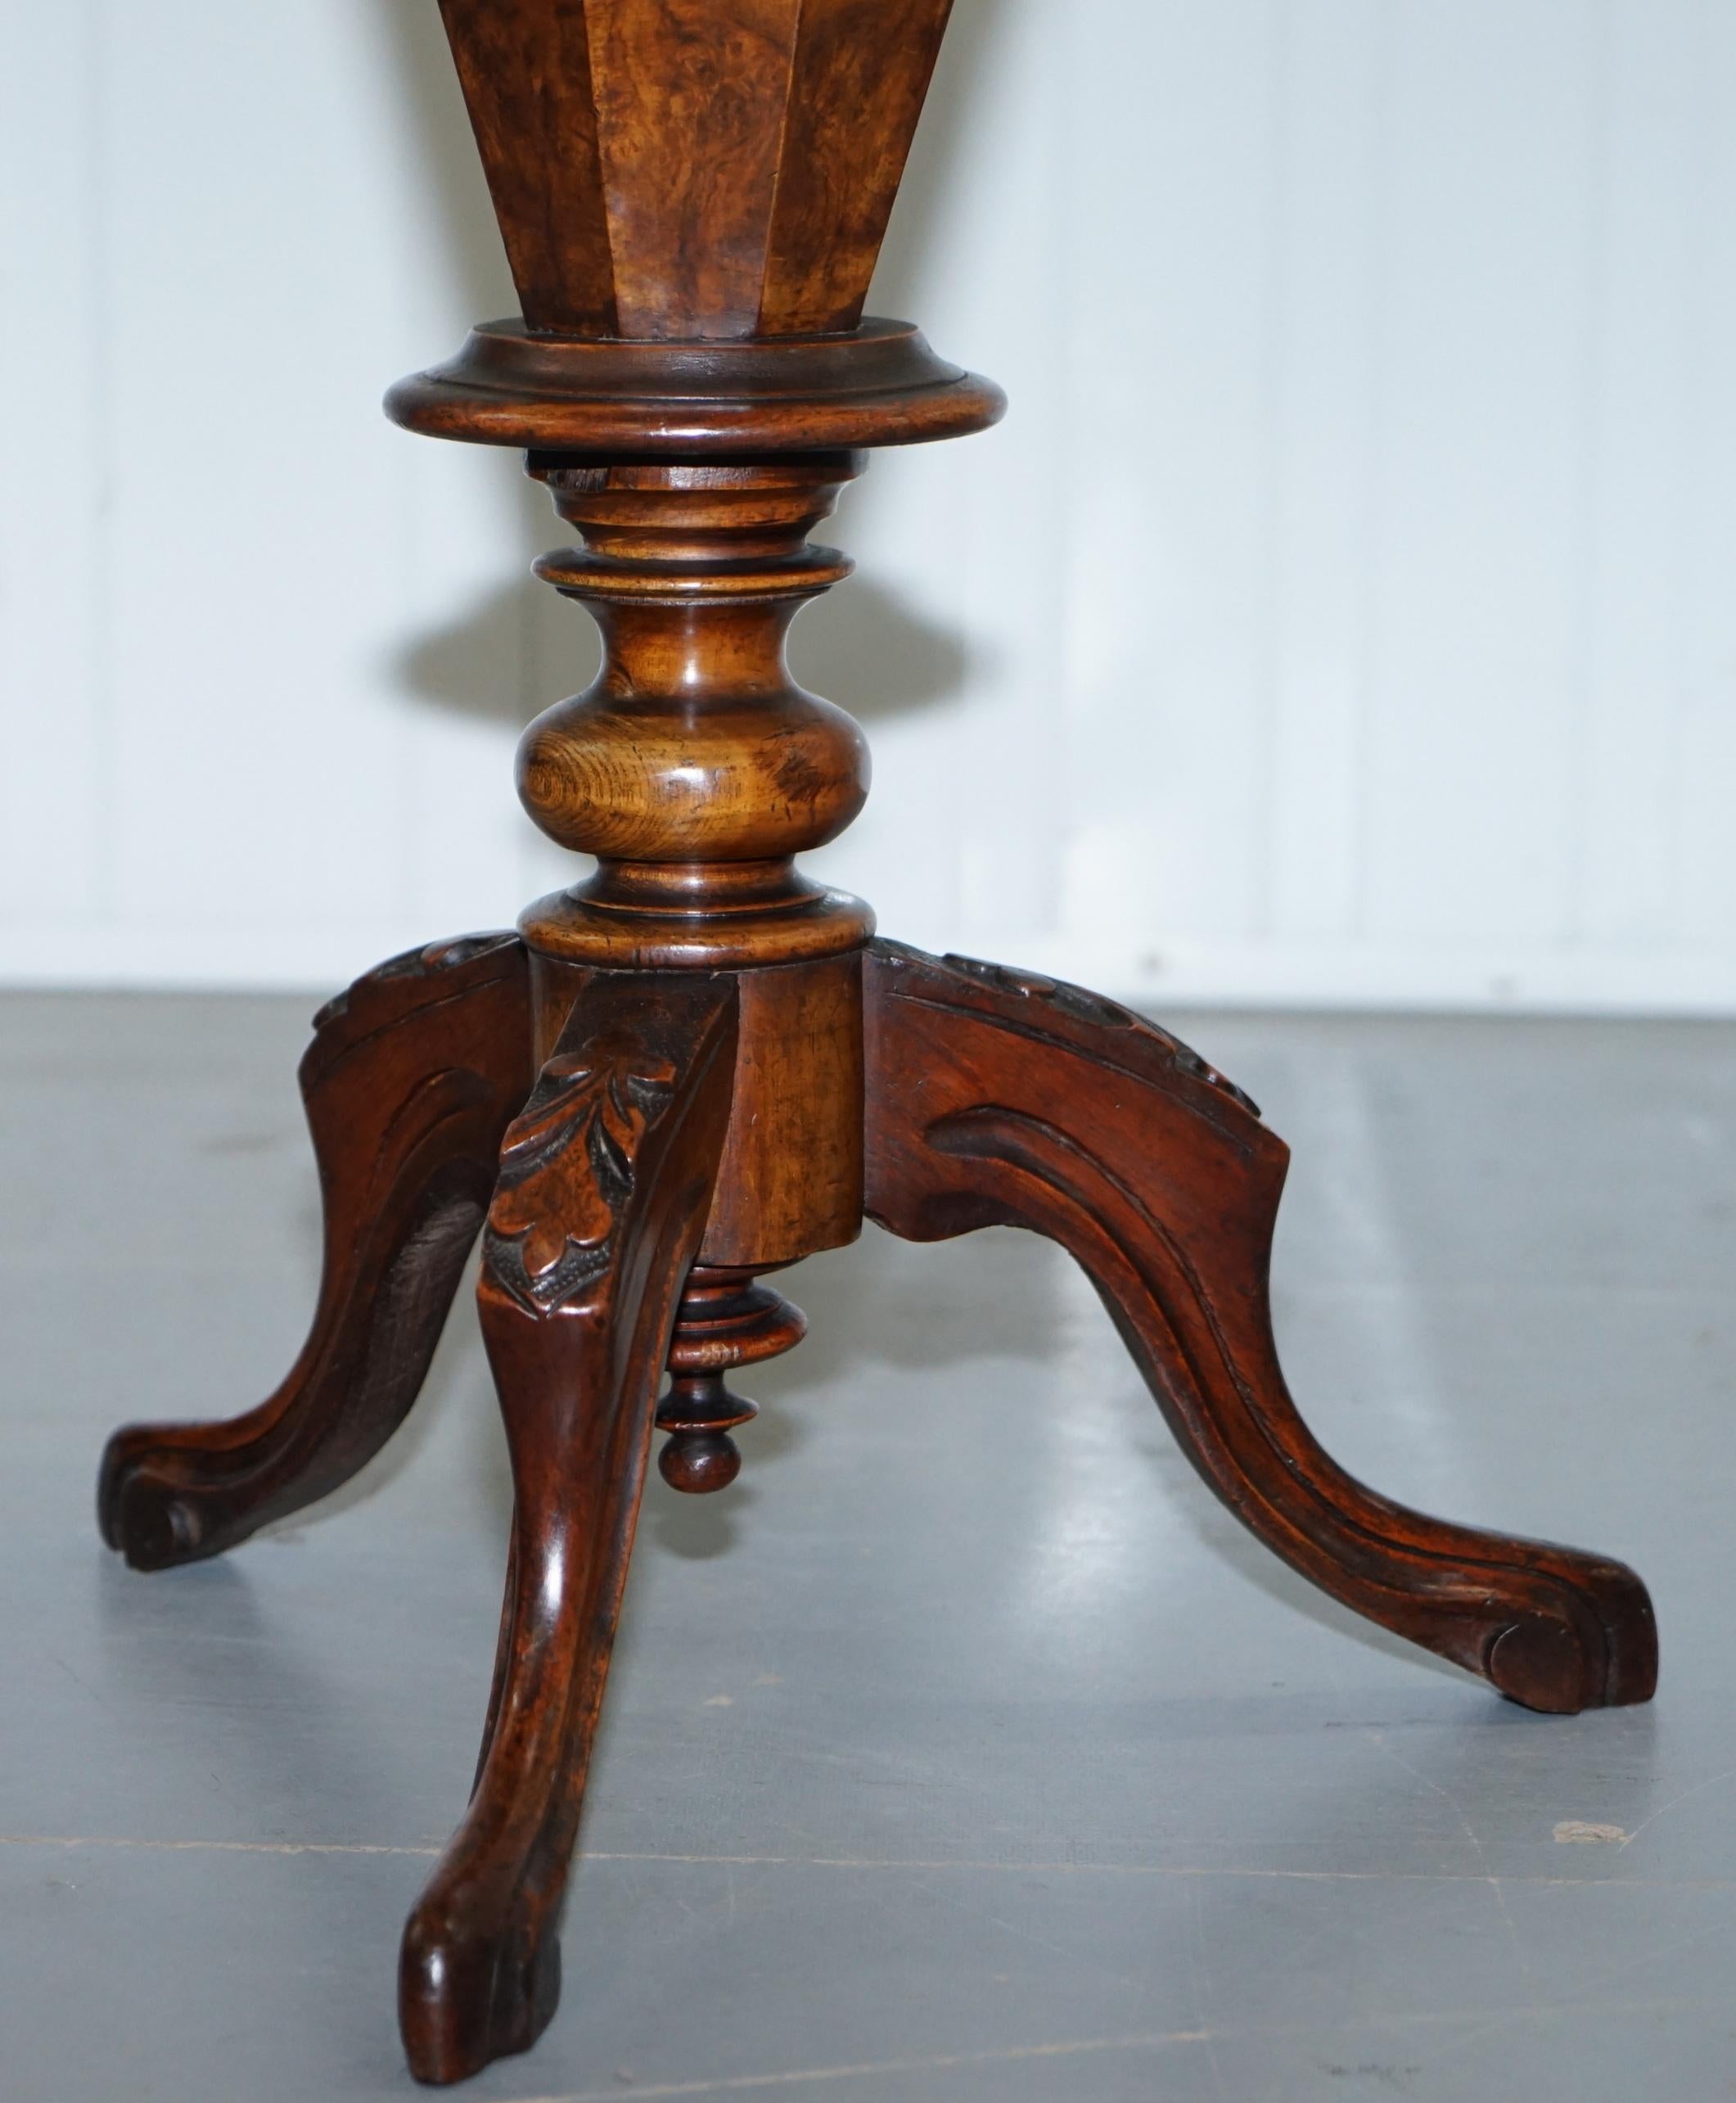 Stunning Burr Walnut Victorian Sewing or Work Box Great as Side Lamp End Table 1